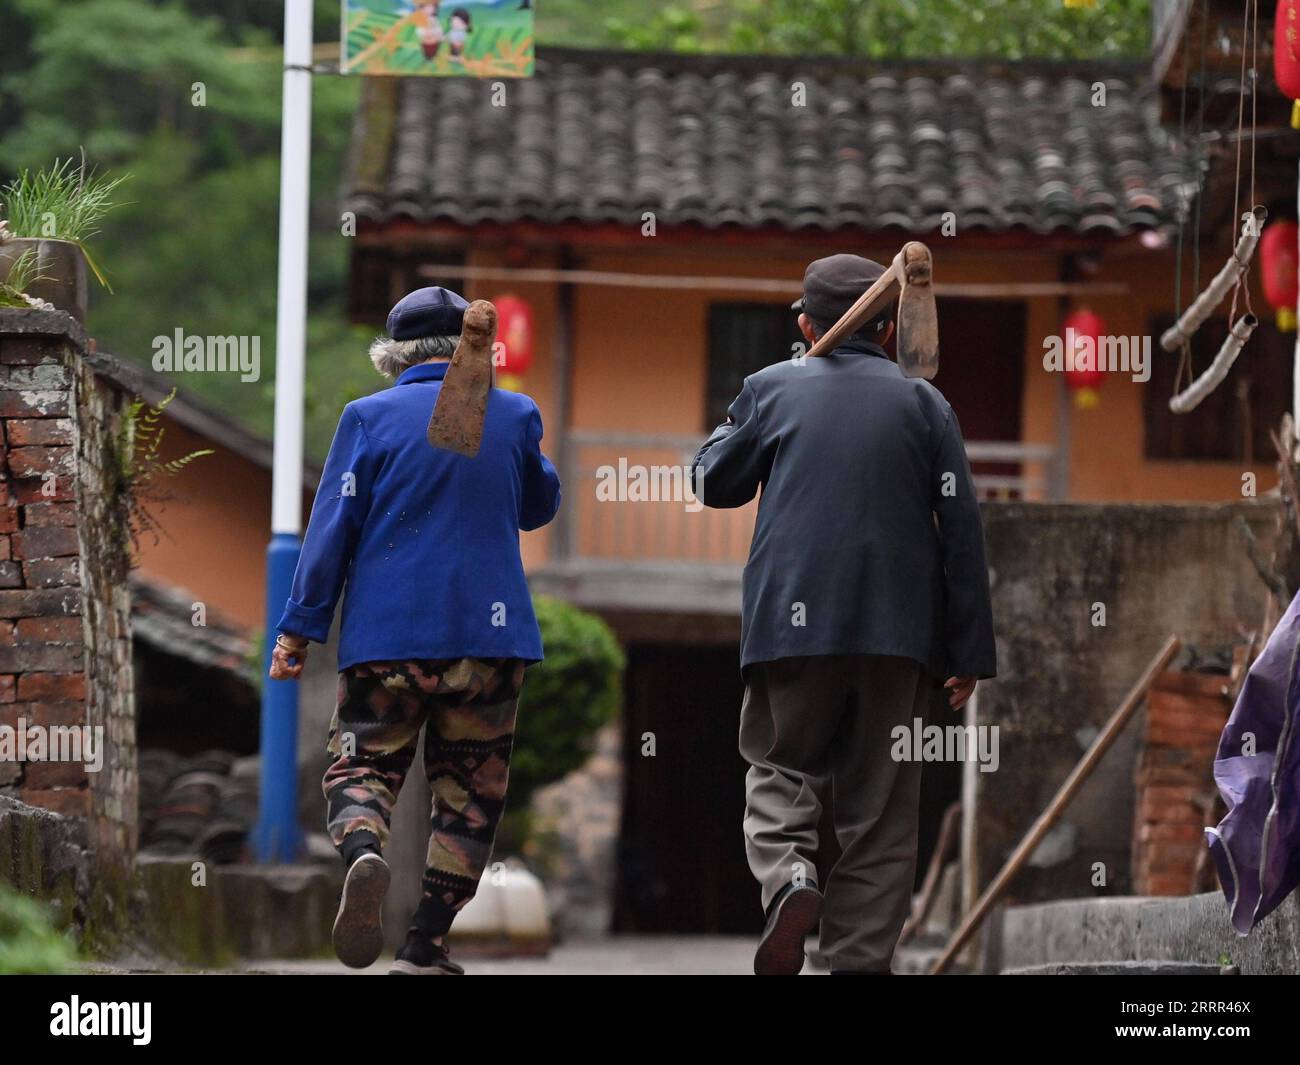 230430 -- BEIJING, April 30, 2023 -- Farmer Long Xianxing R, 85, and his wife return home after work in Yajiao Village of Dongqi Town, Rong an County, south China s Guangxi Zhuang Autonomous Region, April 24, 2023. International Workers Day is observed annually on May 1 in China. The sight of every worker s back prompts images related to effort, progress, practicality, as well as faith in the future. Every worker, no matter how ordinary, deserves a big applause for their every bit of hard work in making themselves a better person and the world a better place.  CHINA-INT L WORKERS DAY-WORKERS C Stock Photo